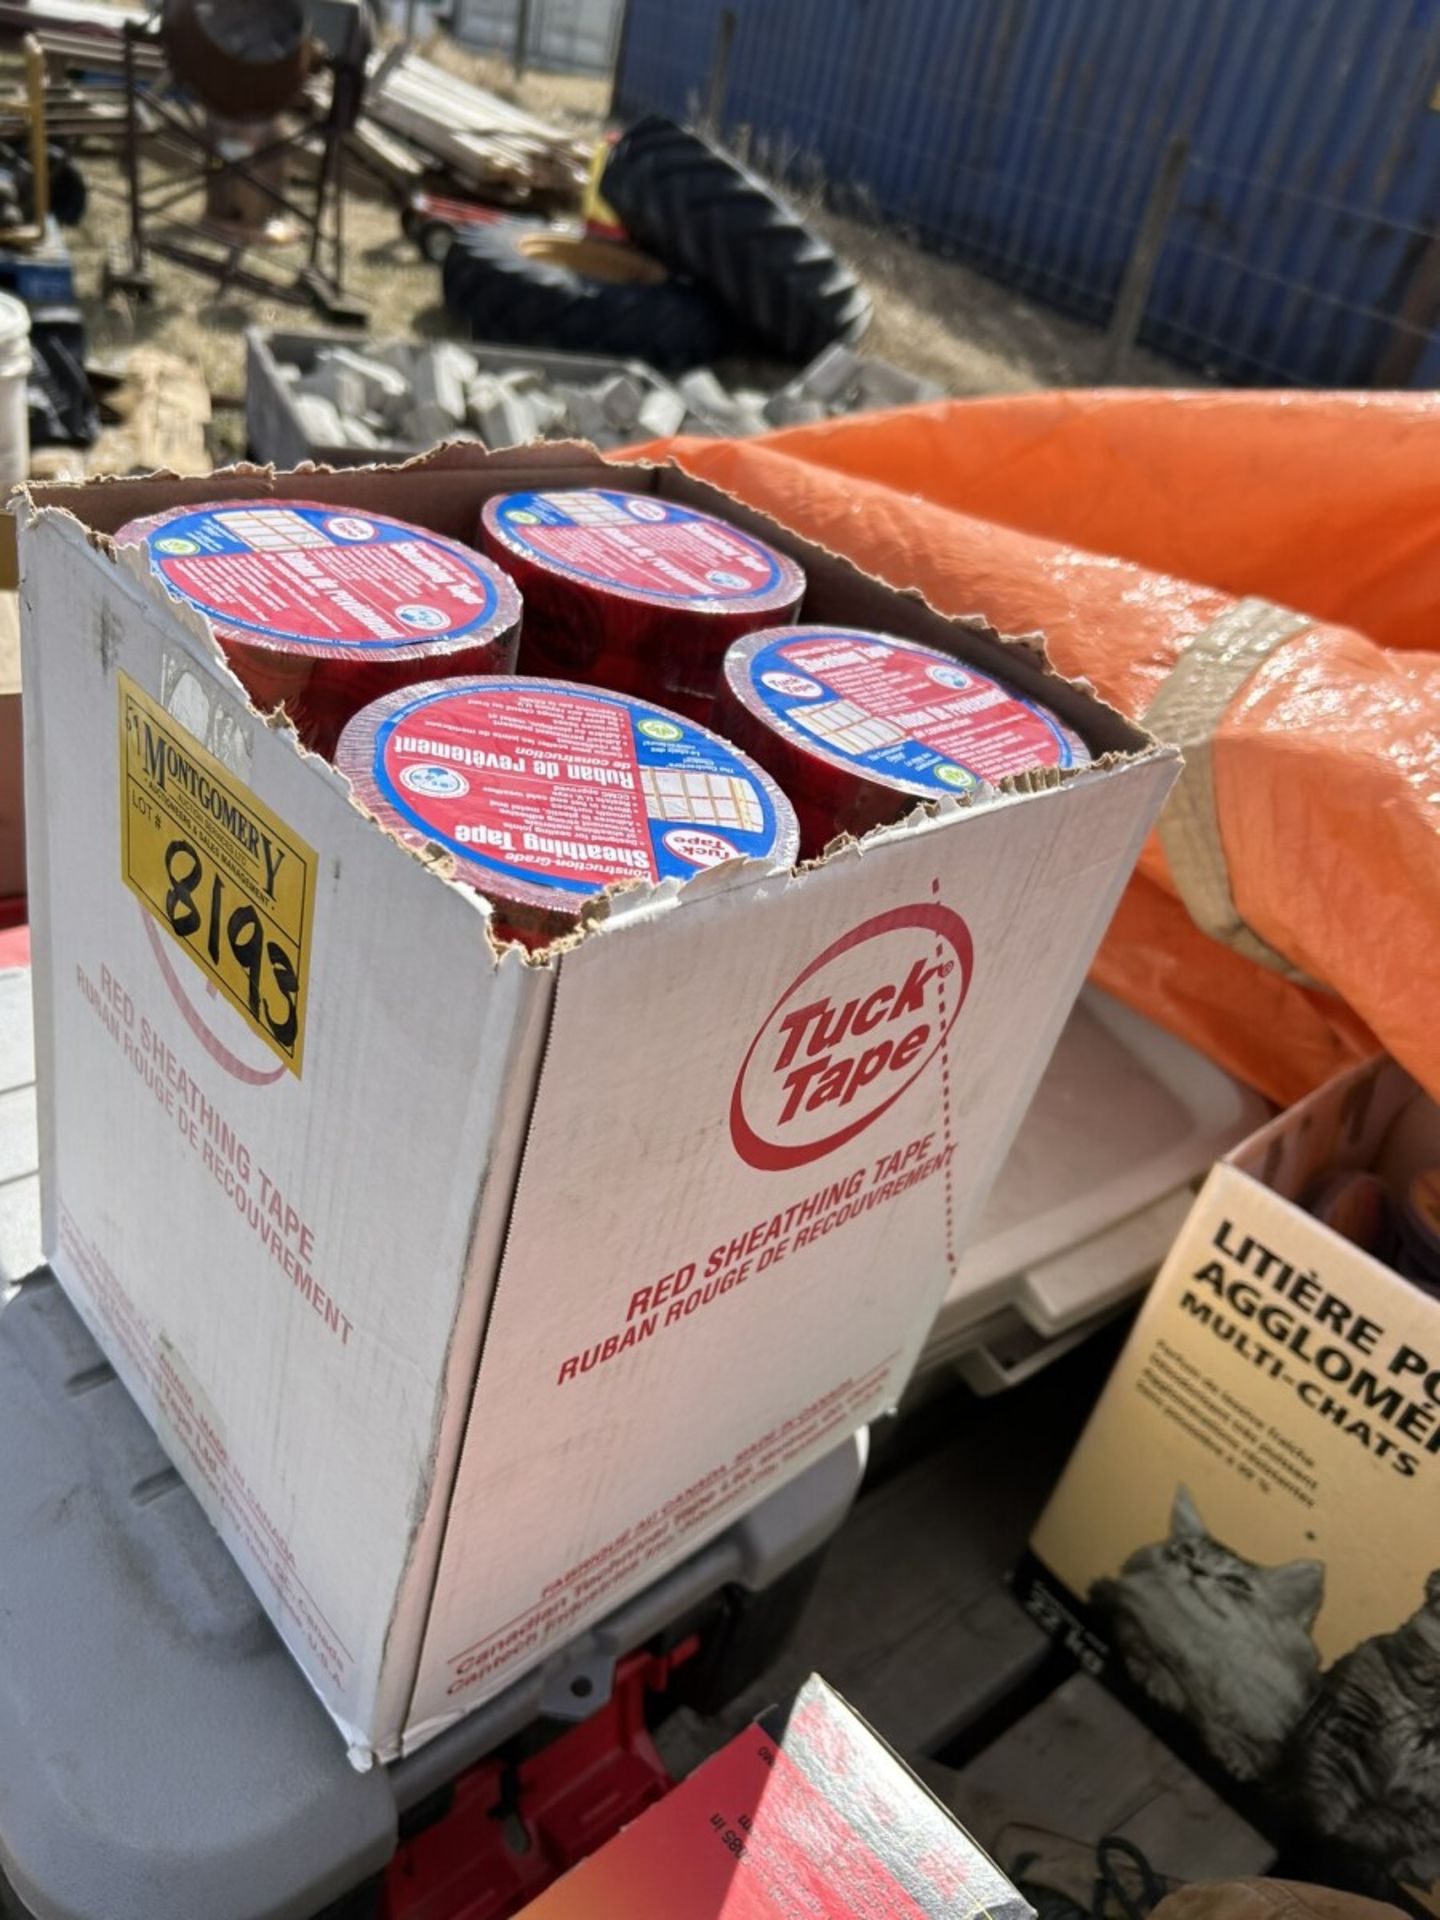 NEW BOX OF TUCK RED SHEATHING TAPE